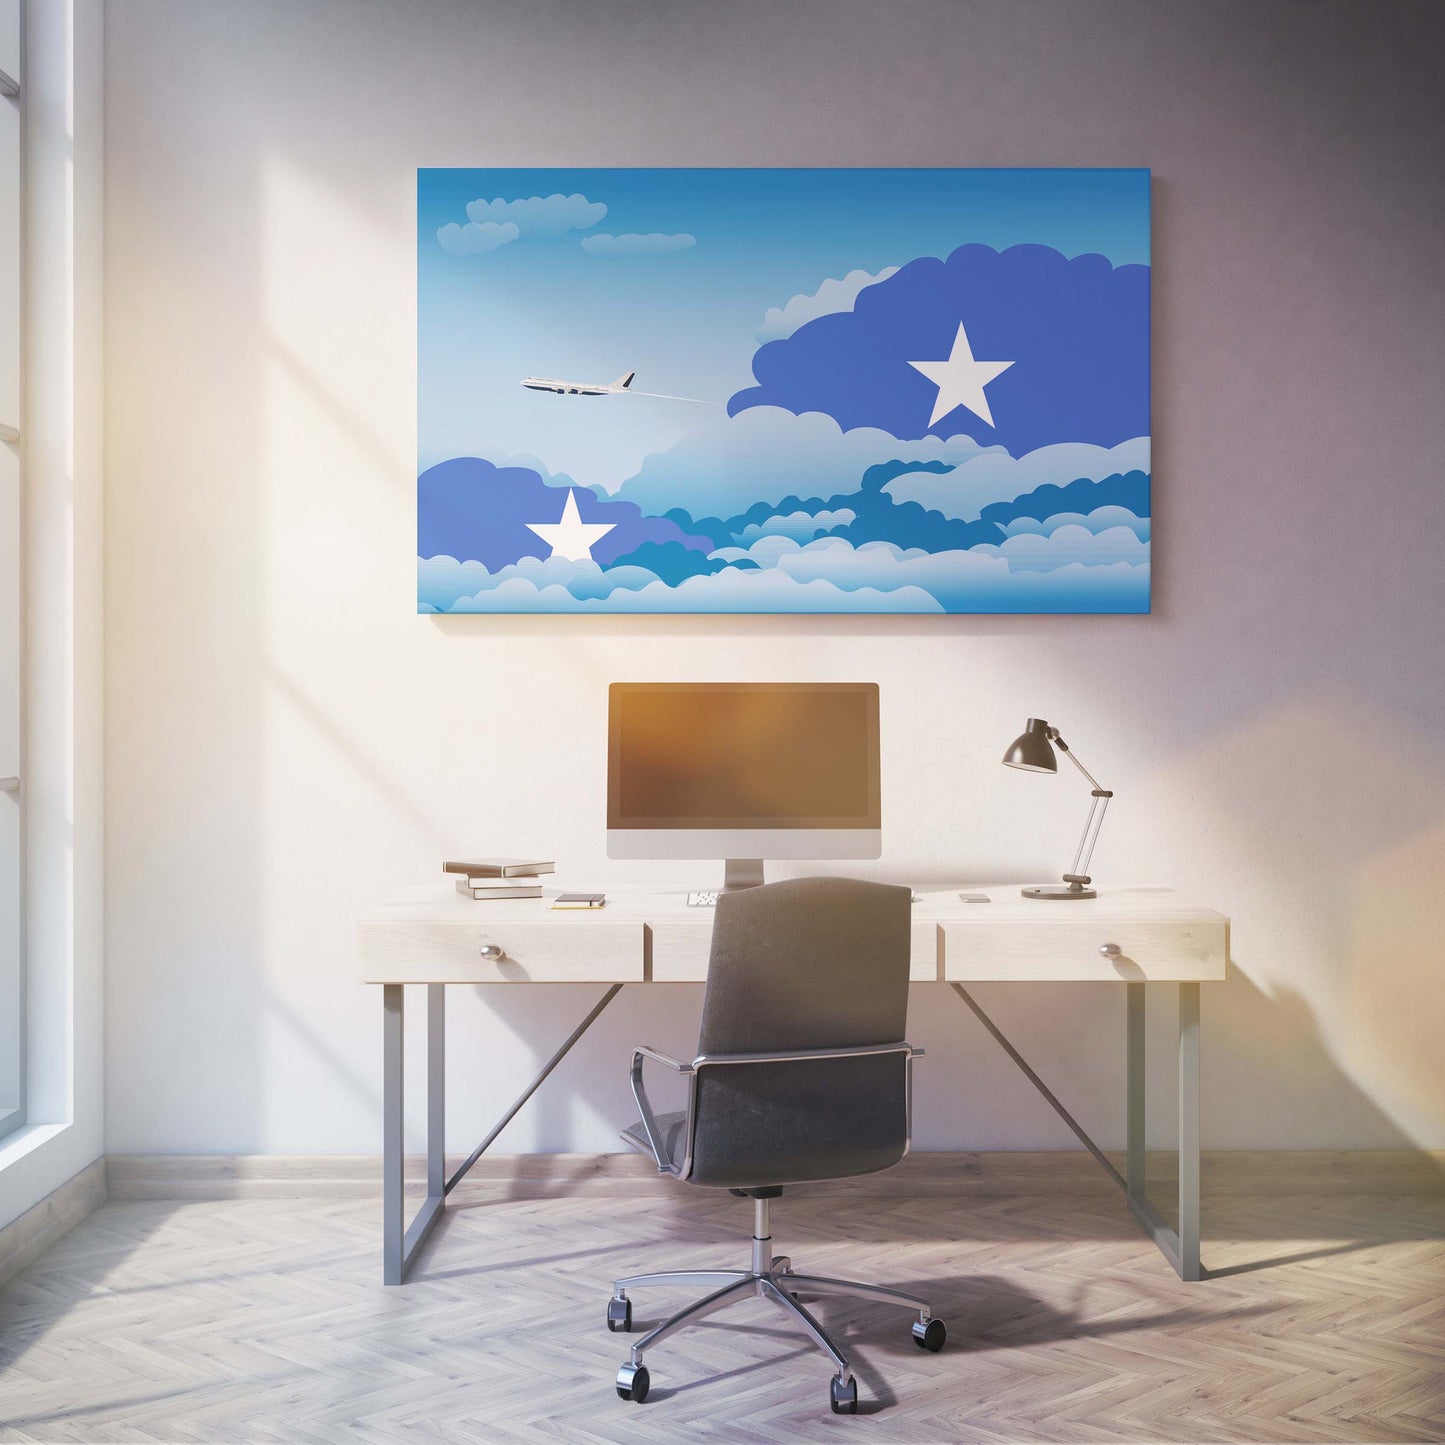 Somalia Flags Day Clouds Canvas Print Framed